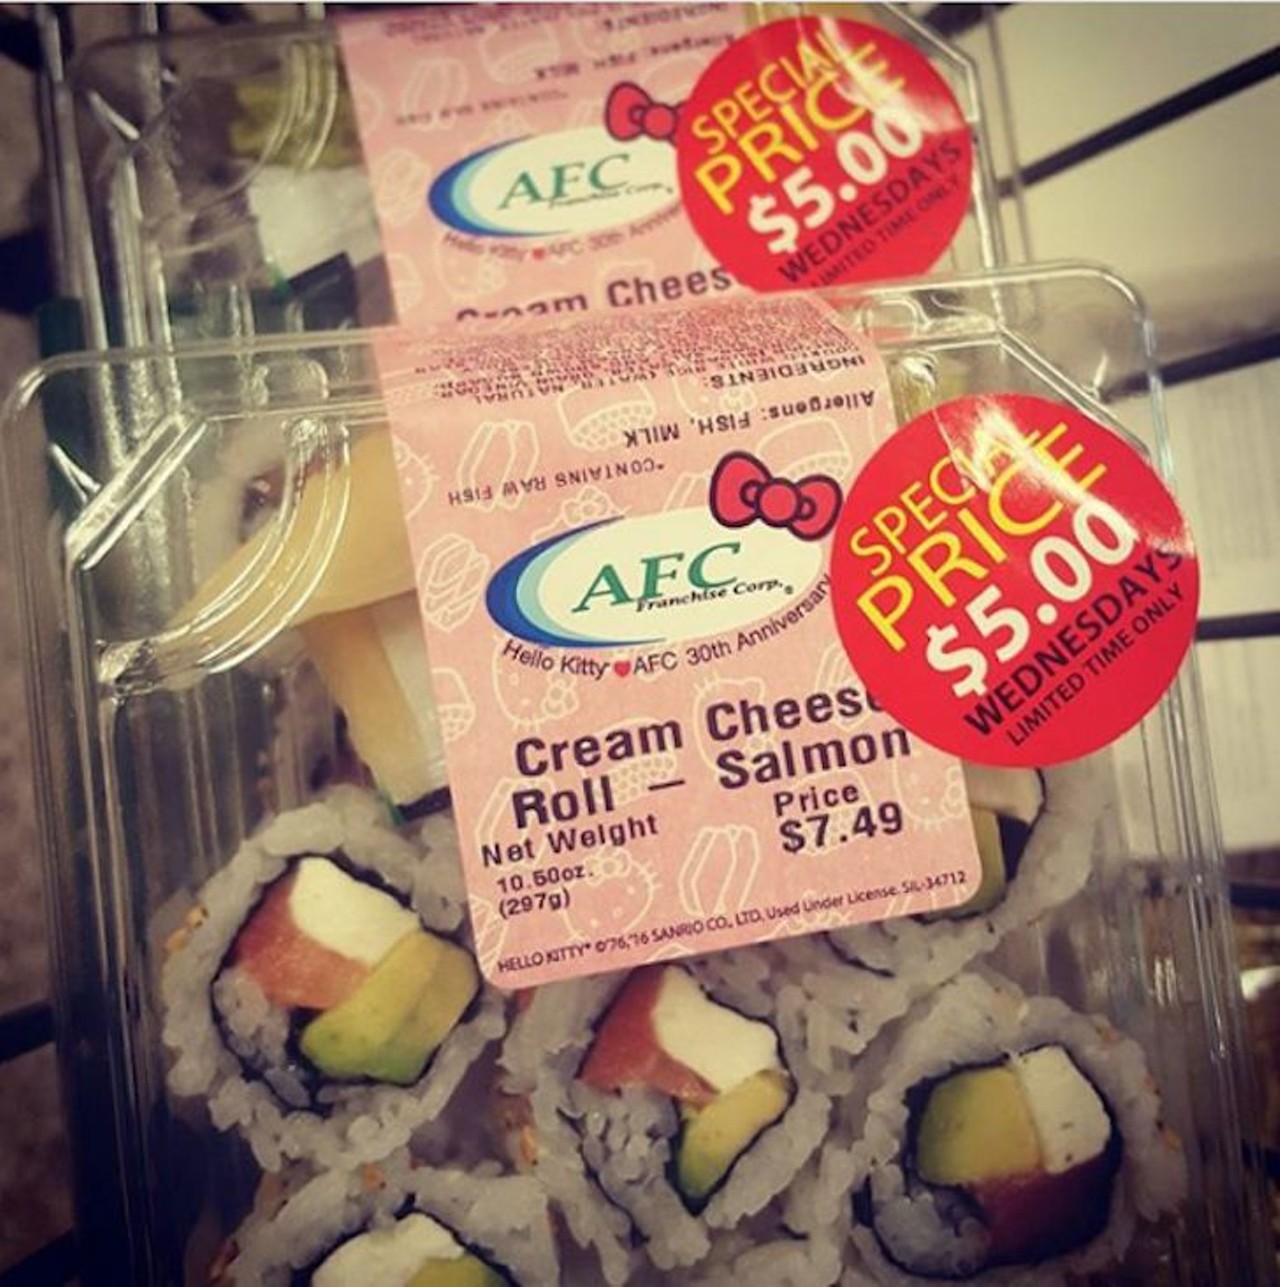 One of the best sushi deals in Orlando is on Wednesdays
Sushi deals are everywhere in Orlando, but every Wednesday Publix is the place to be. At participating stores they offer $5 sushi Wednesdays. Just call ahead of time to make sure your Publix is about that $5 sushi life.
Photo via czarcangemi/instagram